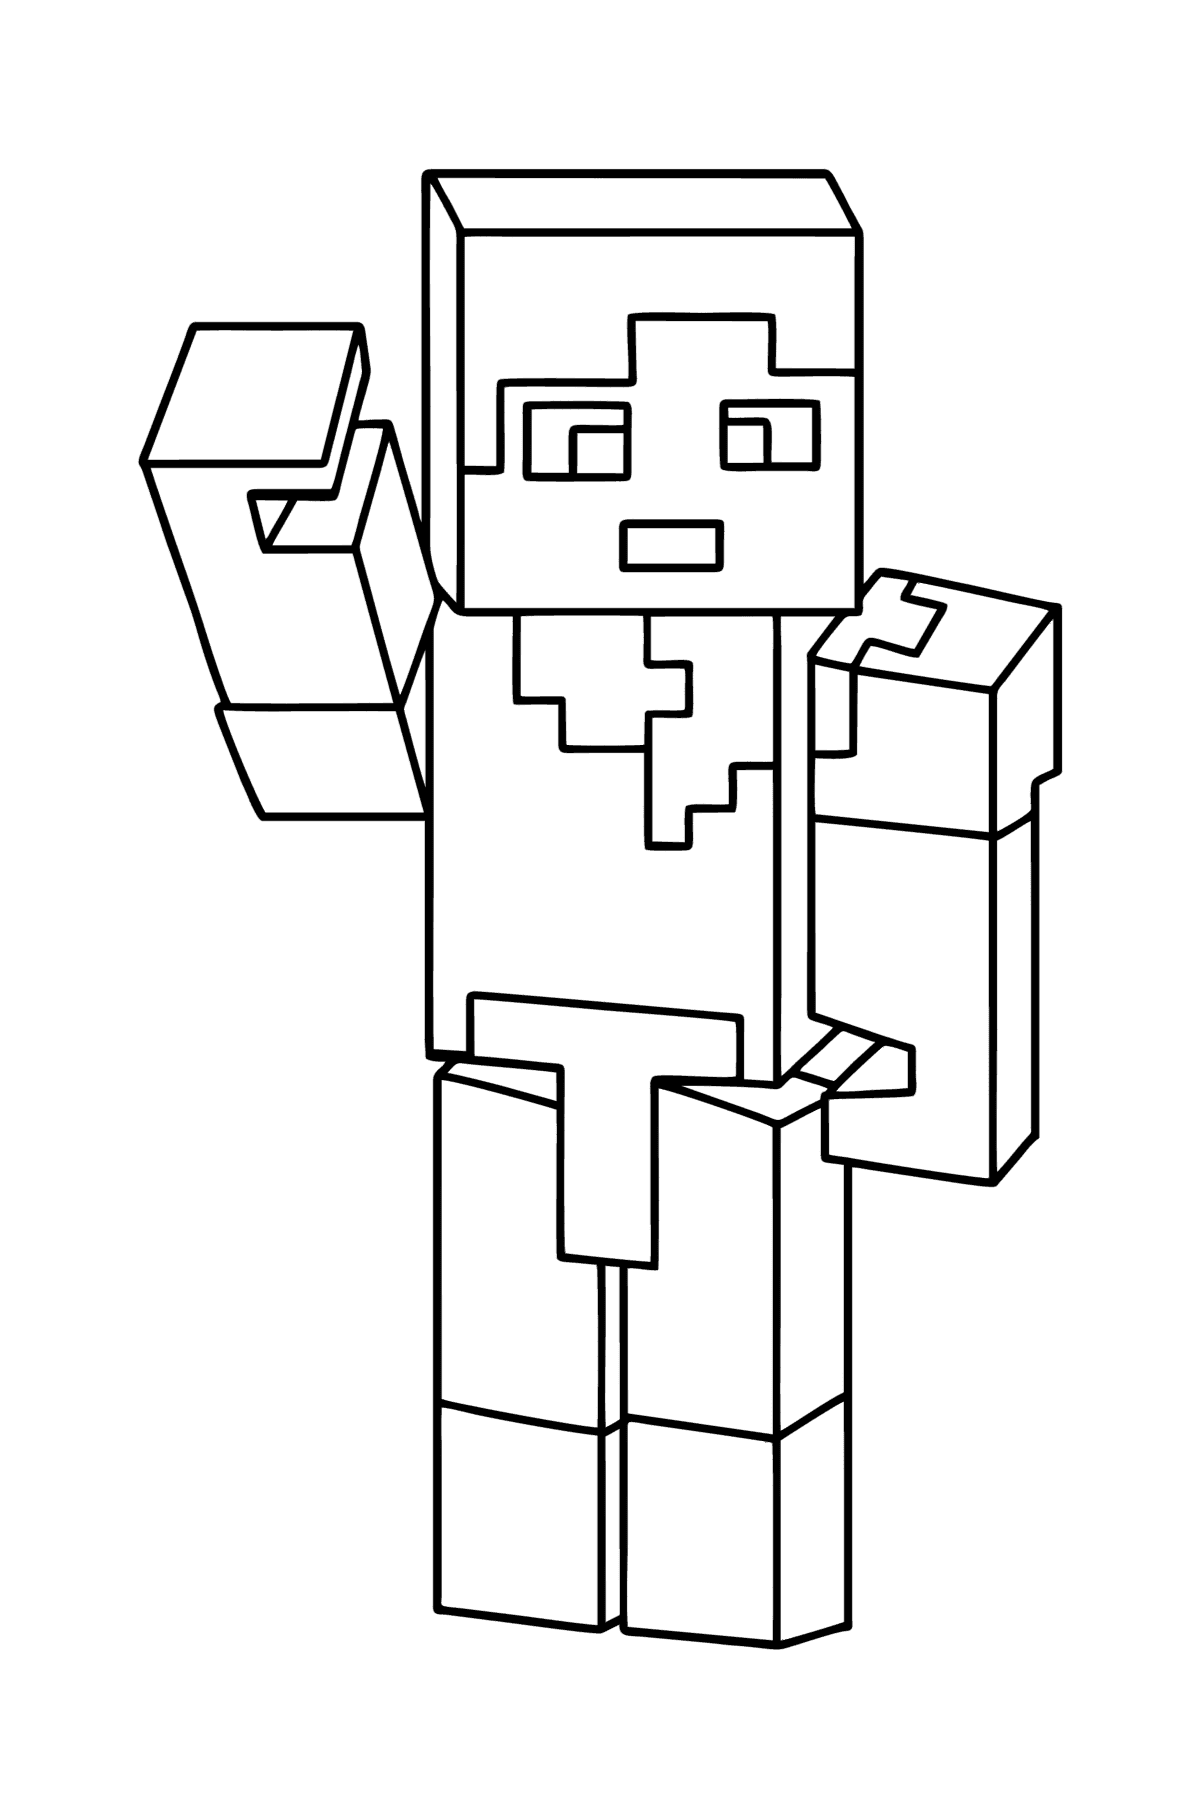 Minecraft Alex coloring page - Coloring Pages for Kids